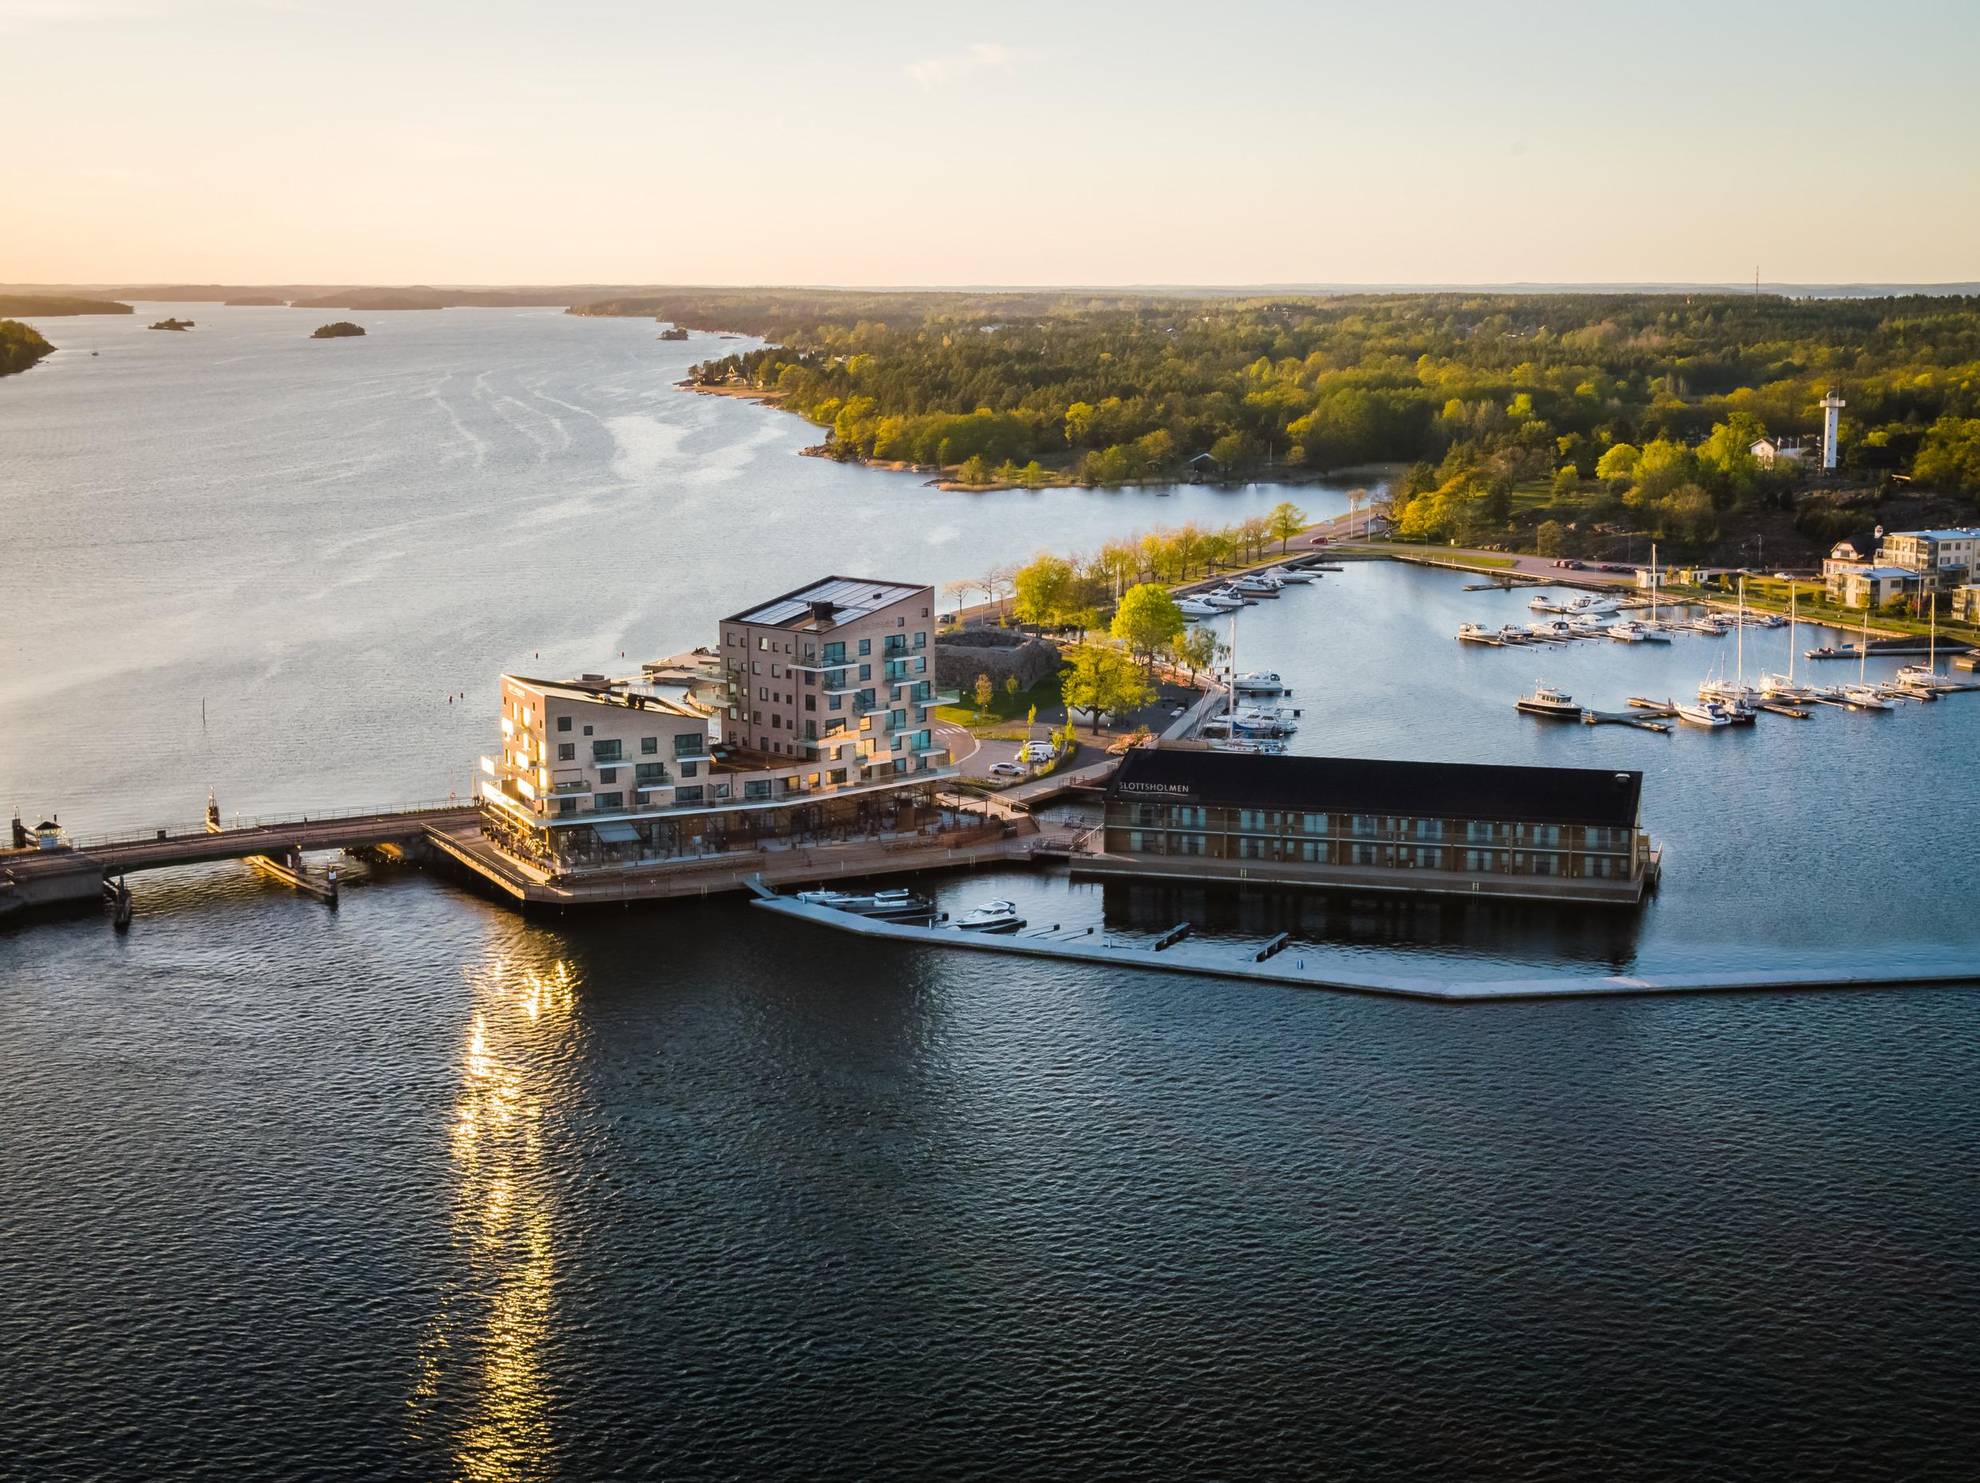 Aerial view of the hotel Slottsholmen and its large terrace, surrounded by water and located by a small harbour.